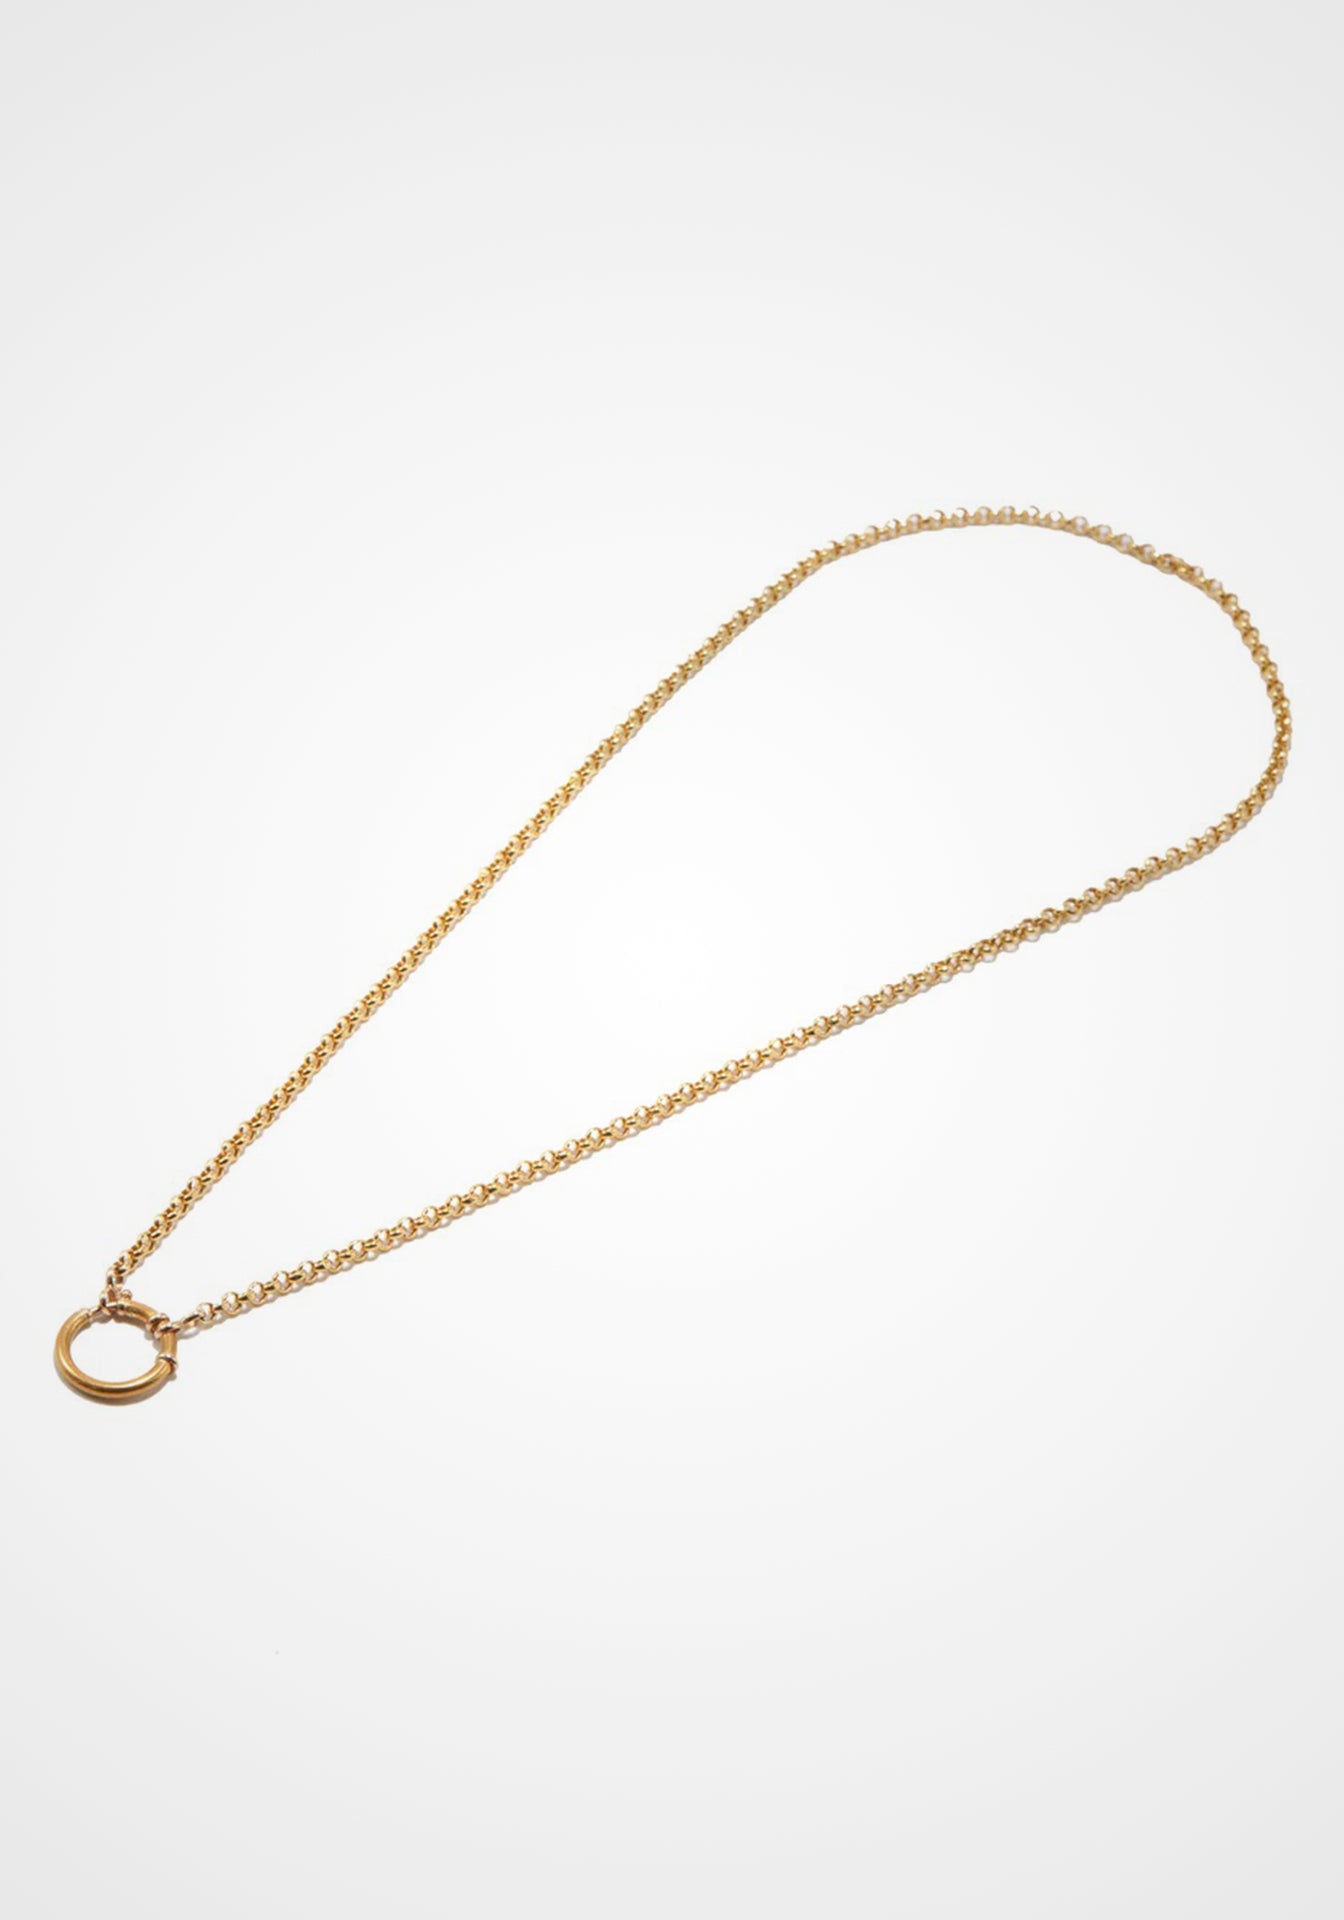 Small Belcher with Bolt Clasp, 14k Yellow Gold Chain